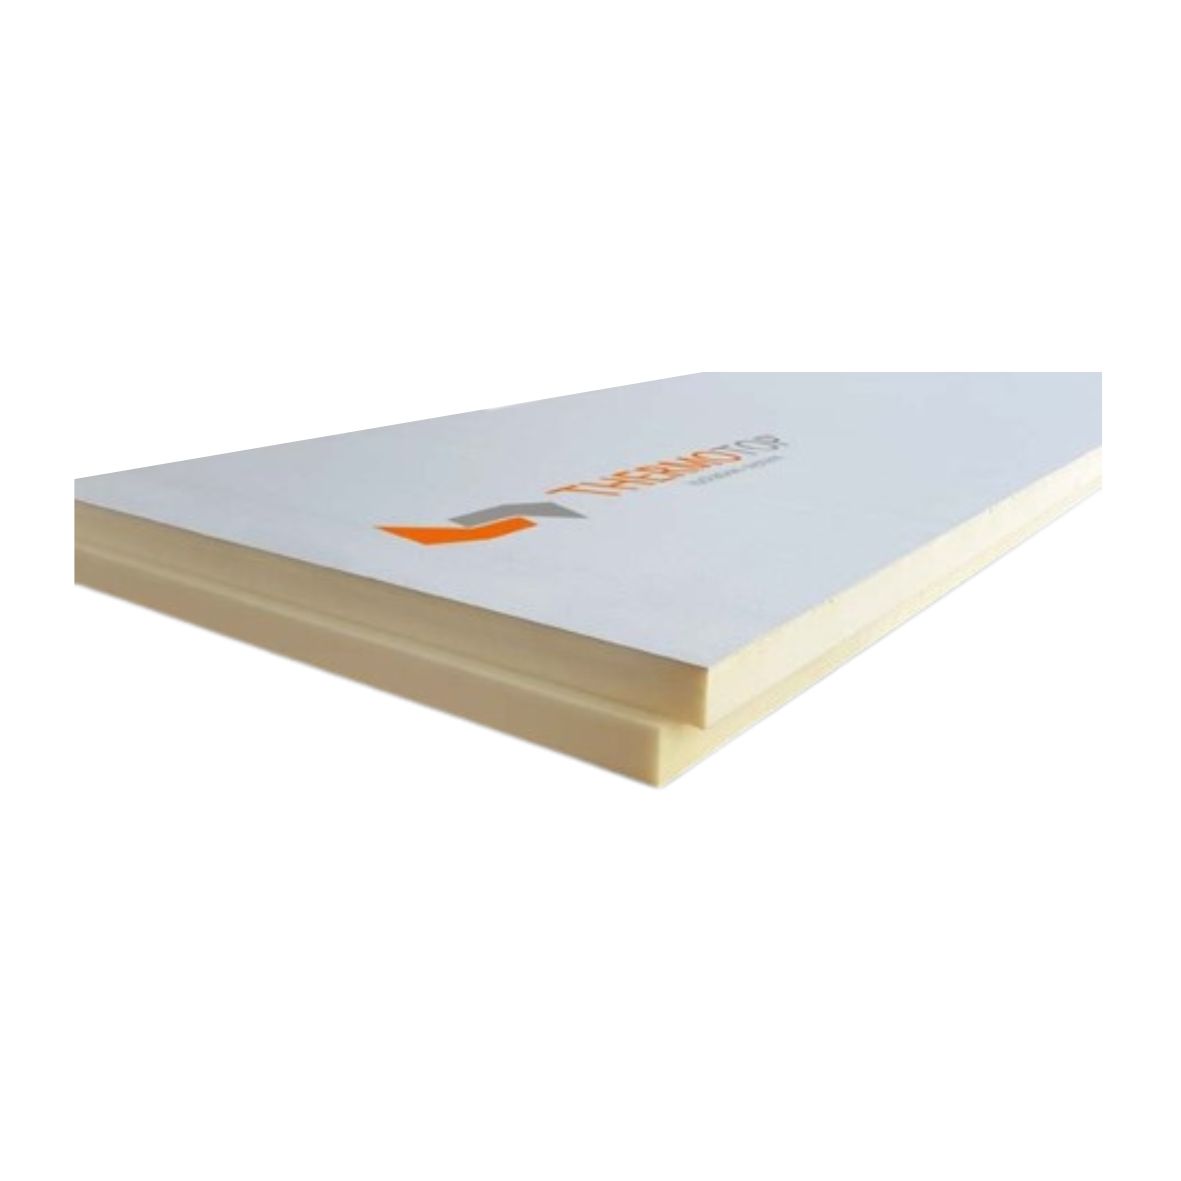 PIR Thermal insulation boards - Thermotop Toboard PIR BV-BV thermal insulation board 120 x 1200 x 2400 mm, https:maxbau.ro